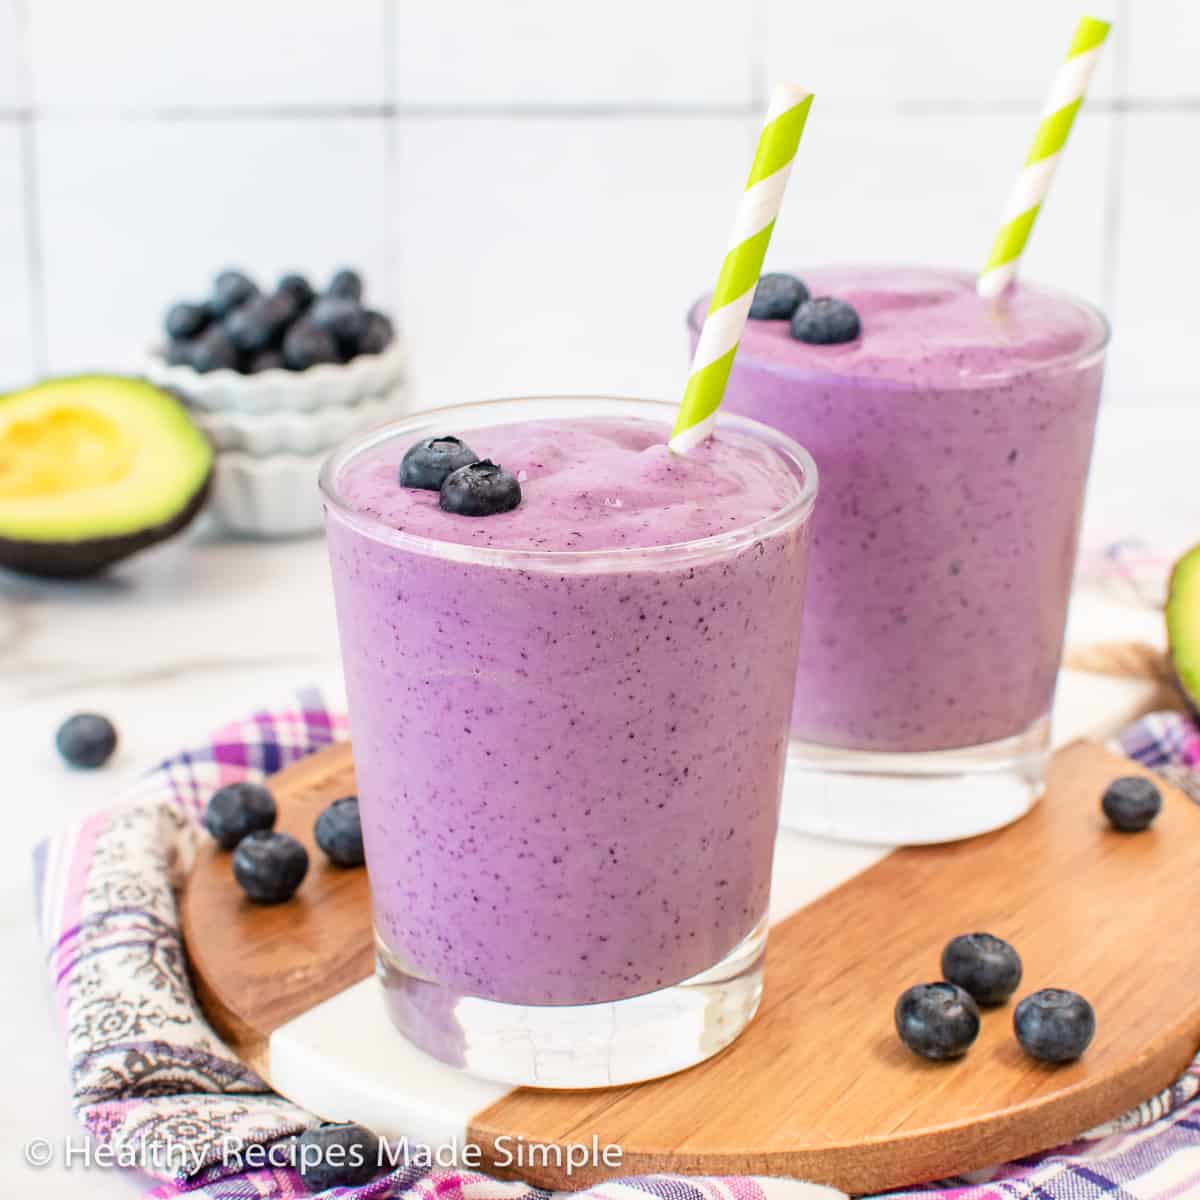 2 glasses of a purple smoothie topped with blueberries and a green and white straw.